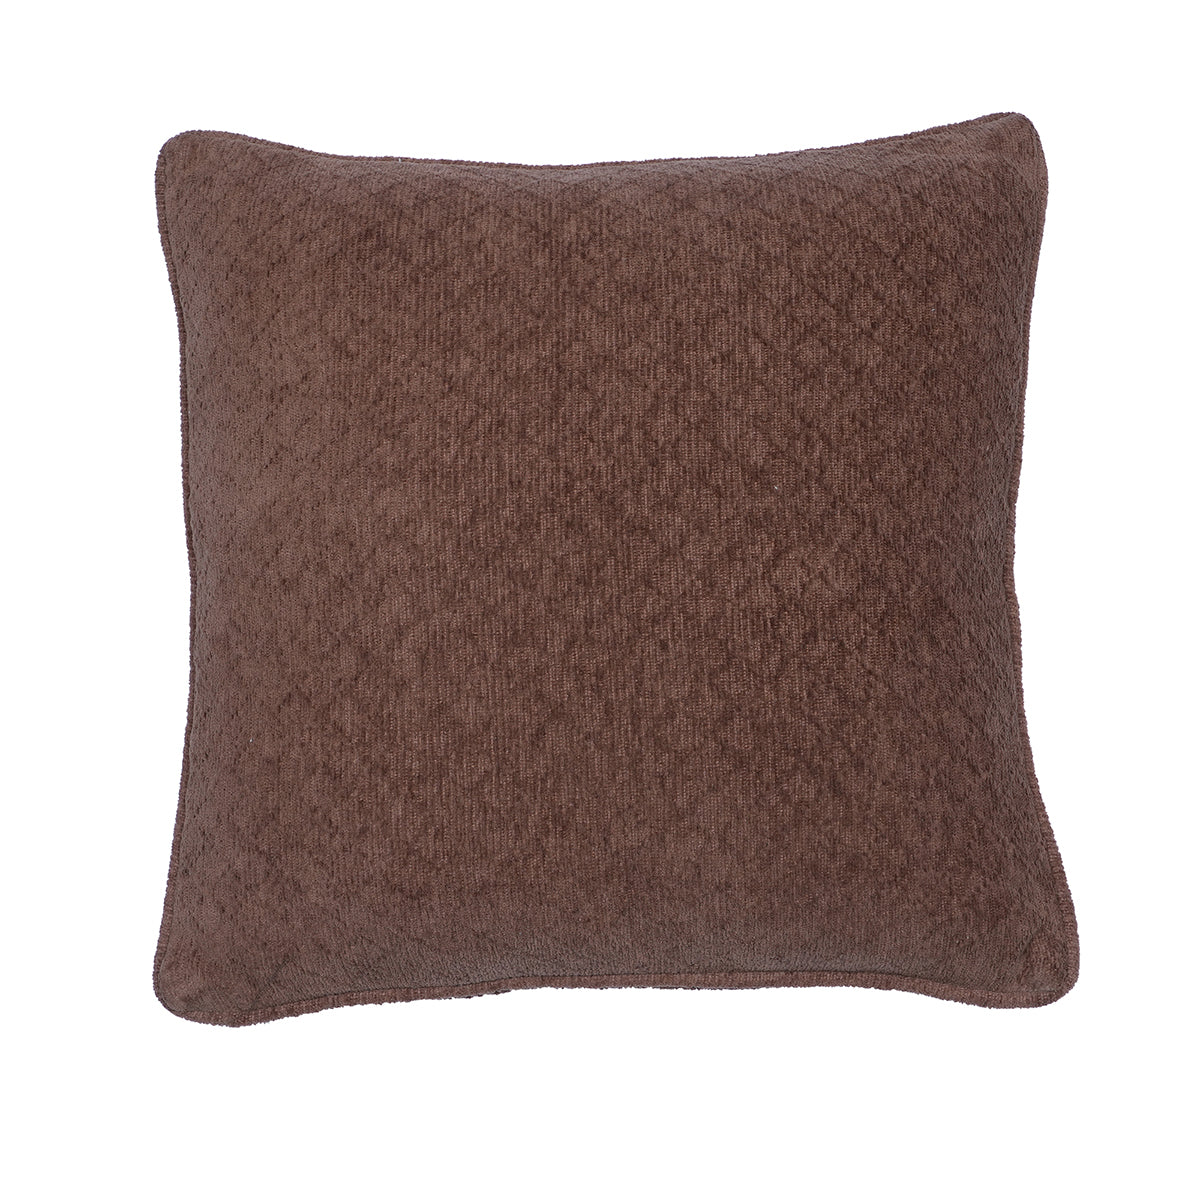 Blaize 100% Cotton Solid Weave Brown Cushion Cover